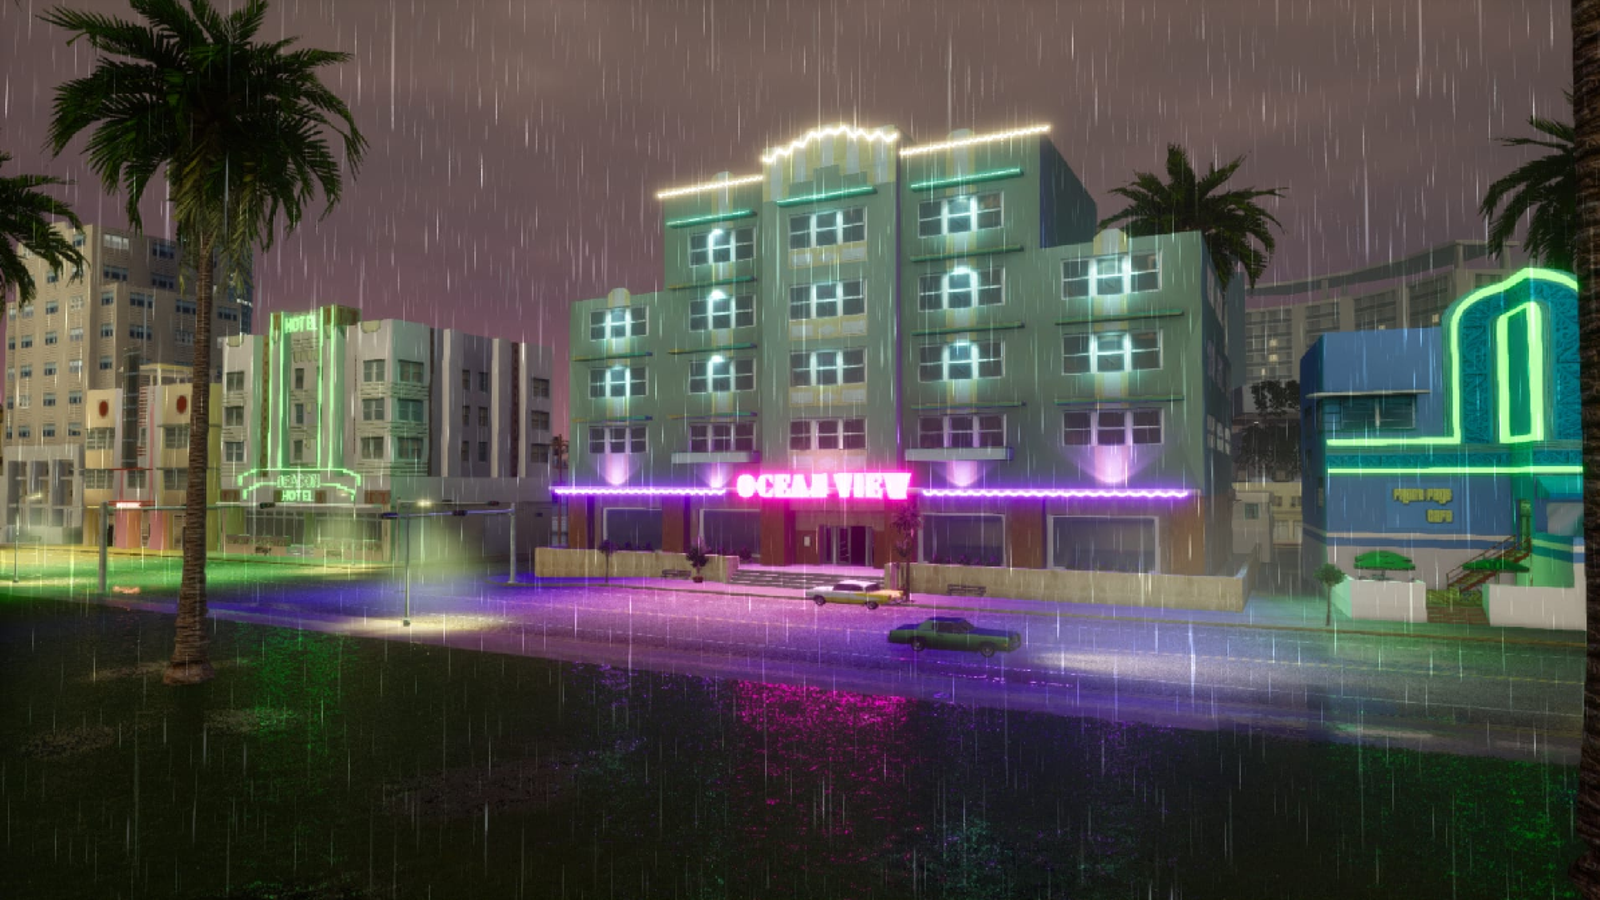 Buy Grand Theft Auto: Vice City – The Definitive Edition - Microsoft